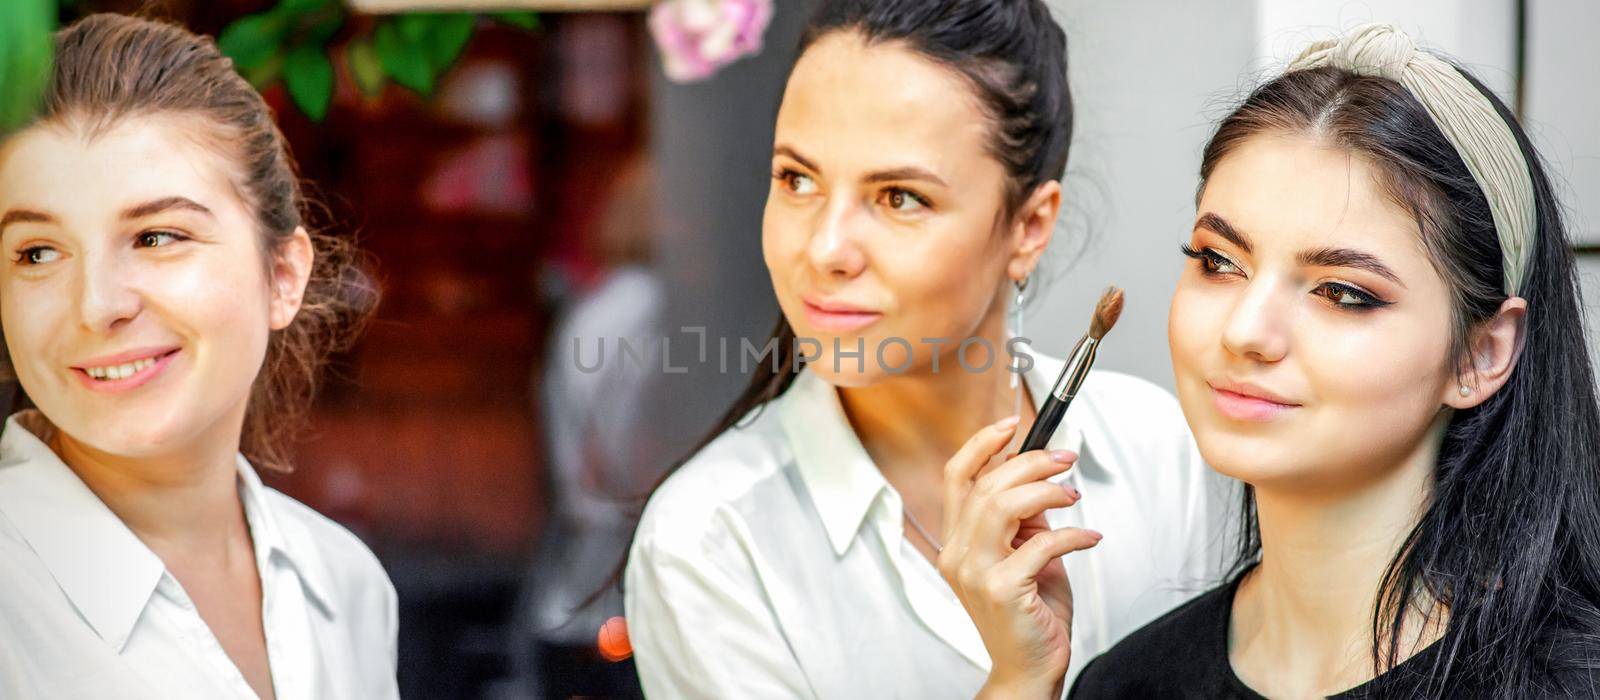 Make-up artist doing makeup for young beautiful bride applying wedding makeup in a beauty salon